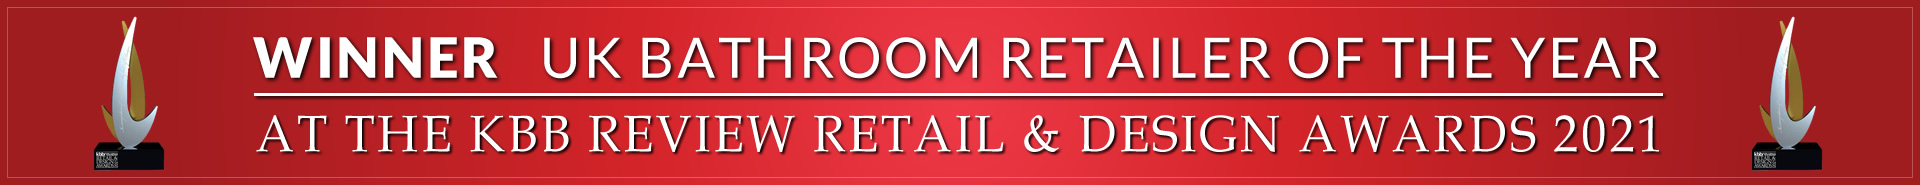 WINNER - 'UK Bathroom Retailer of the Year' at the KBB Review Retail & Design Awards 2021